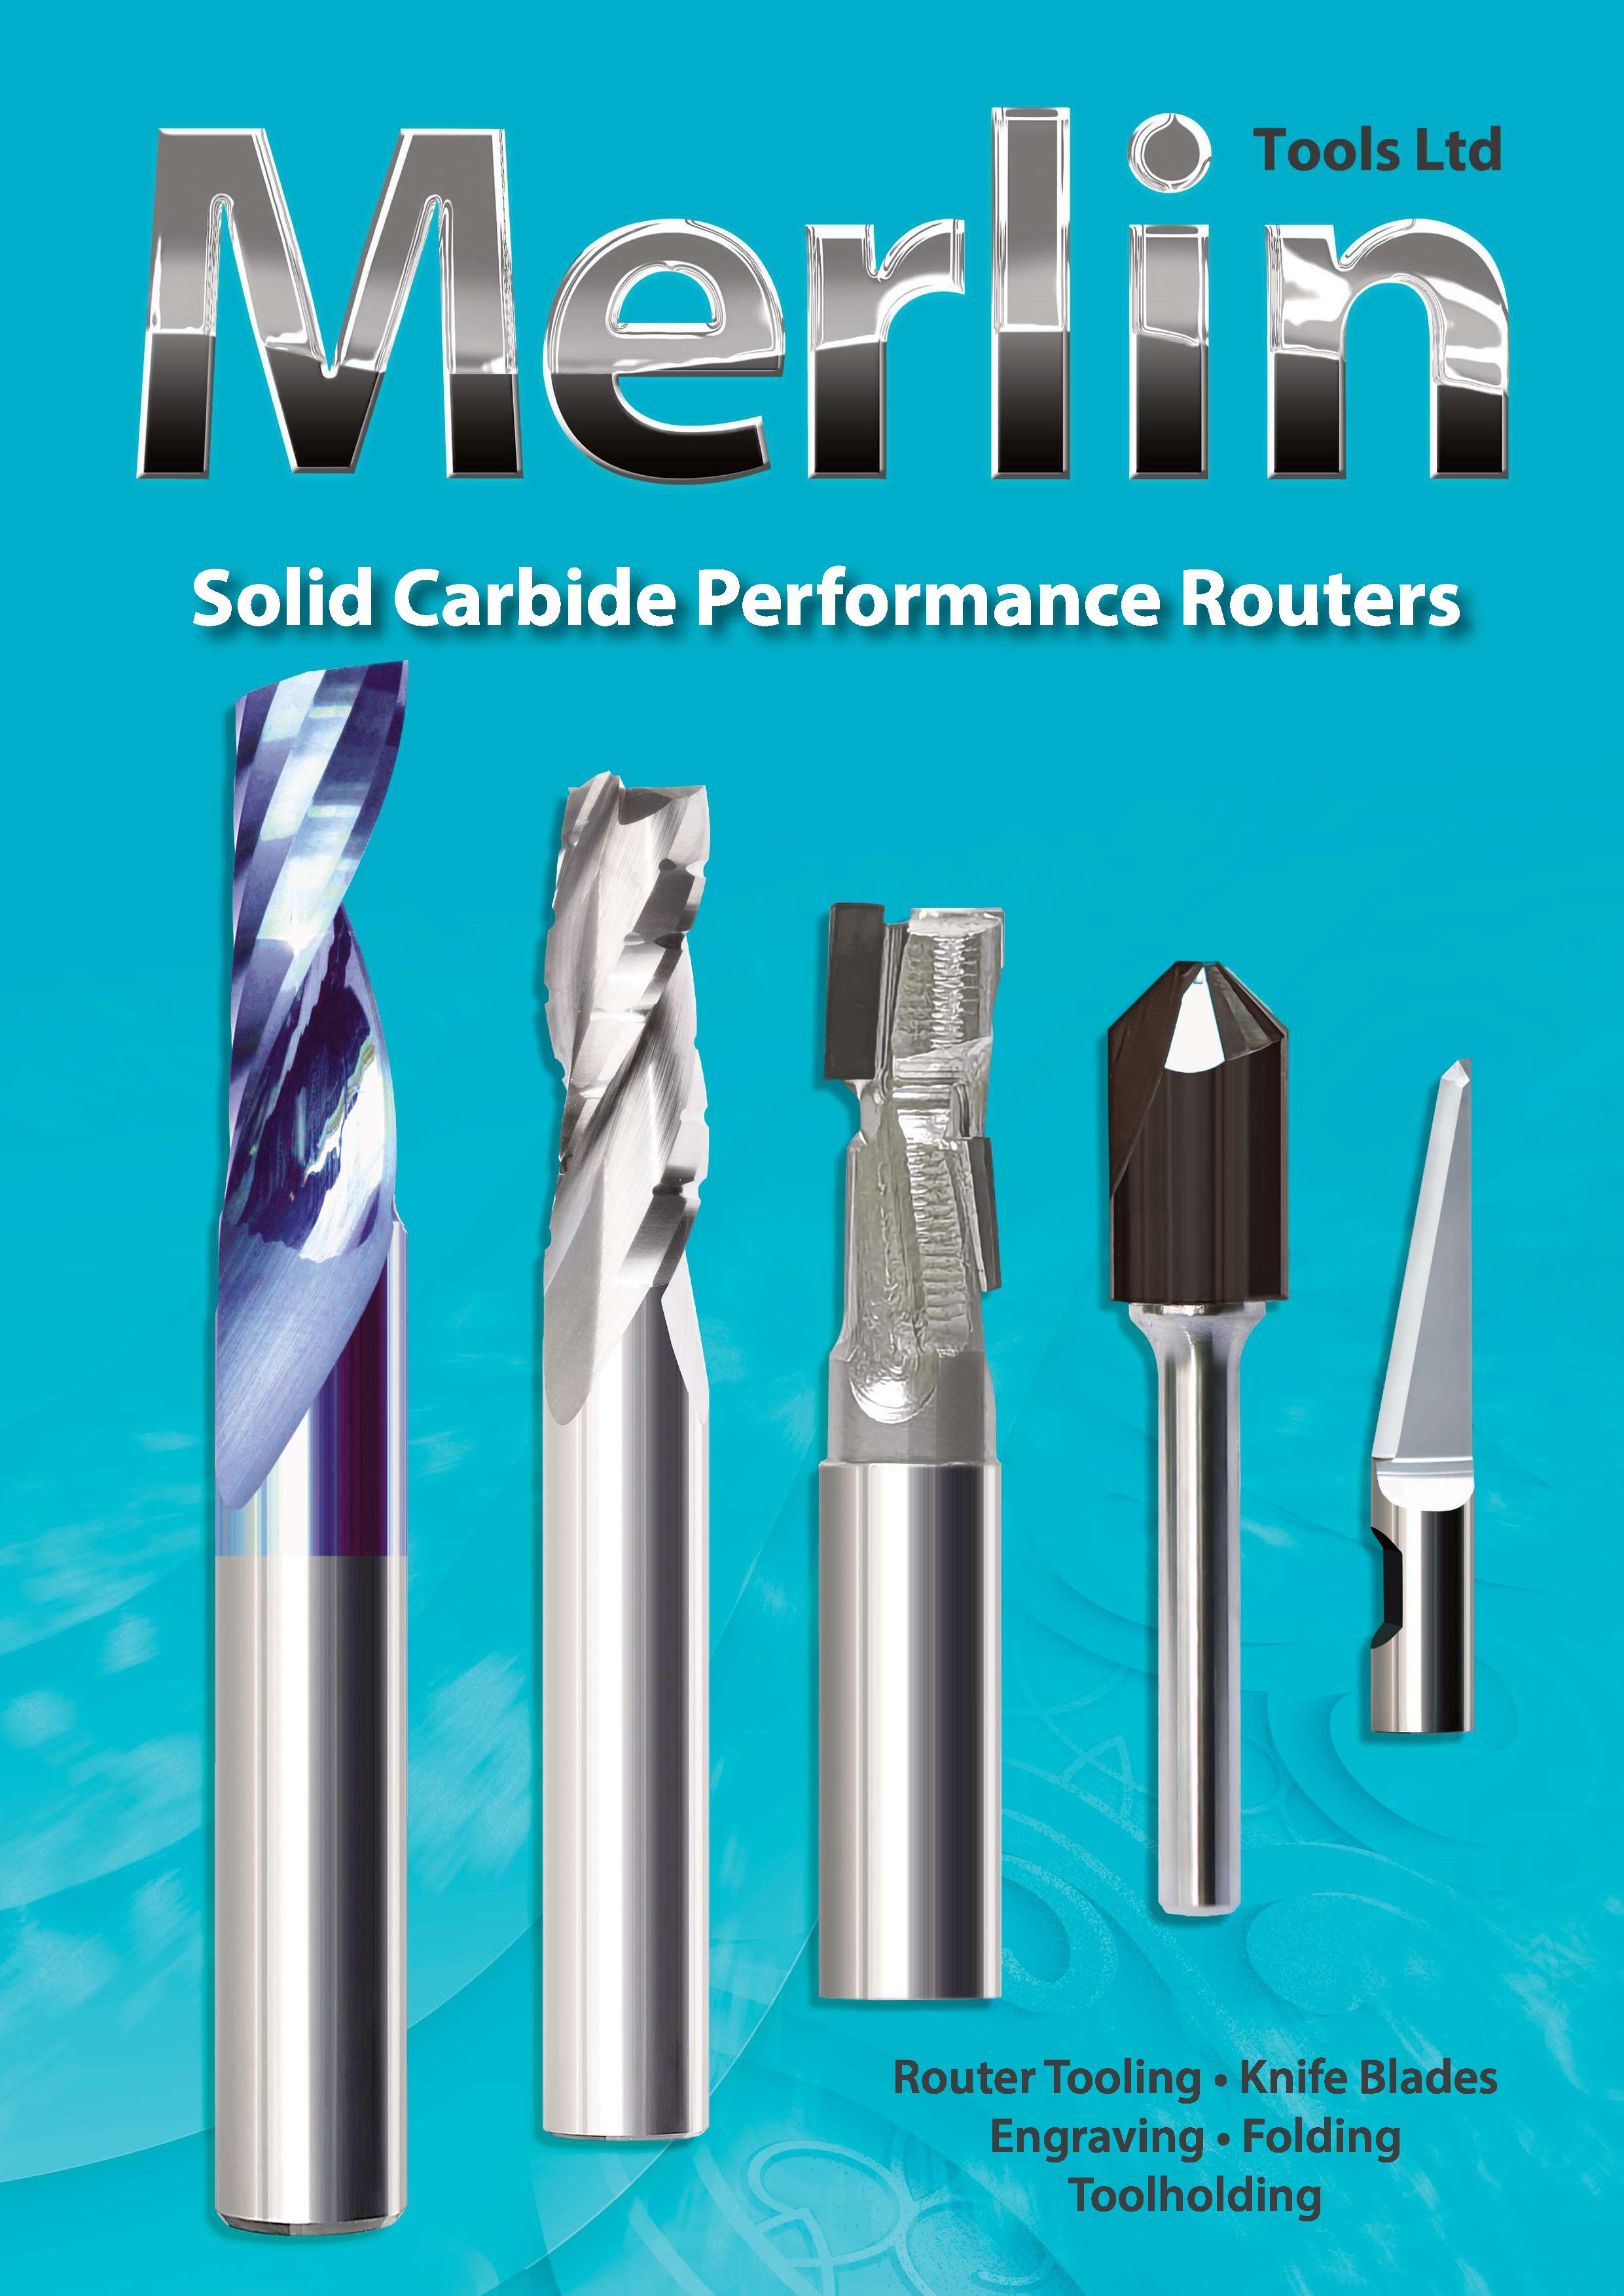 New Performance Router Catalogue!